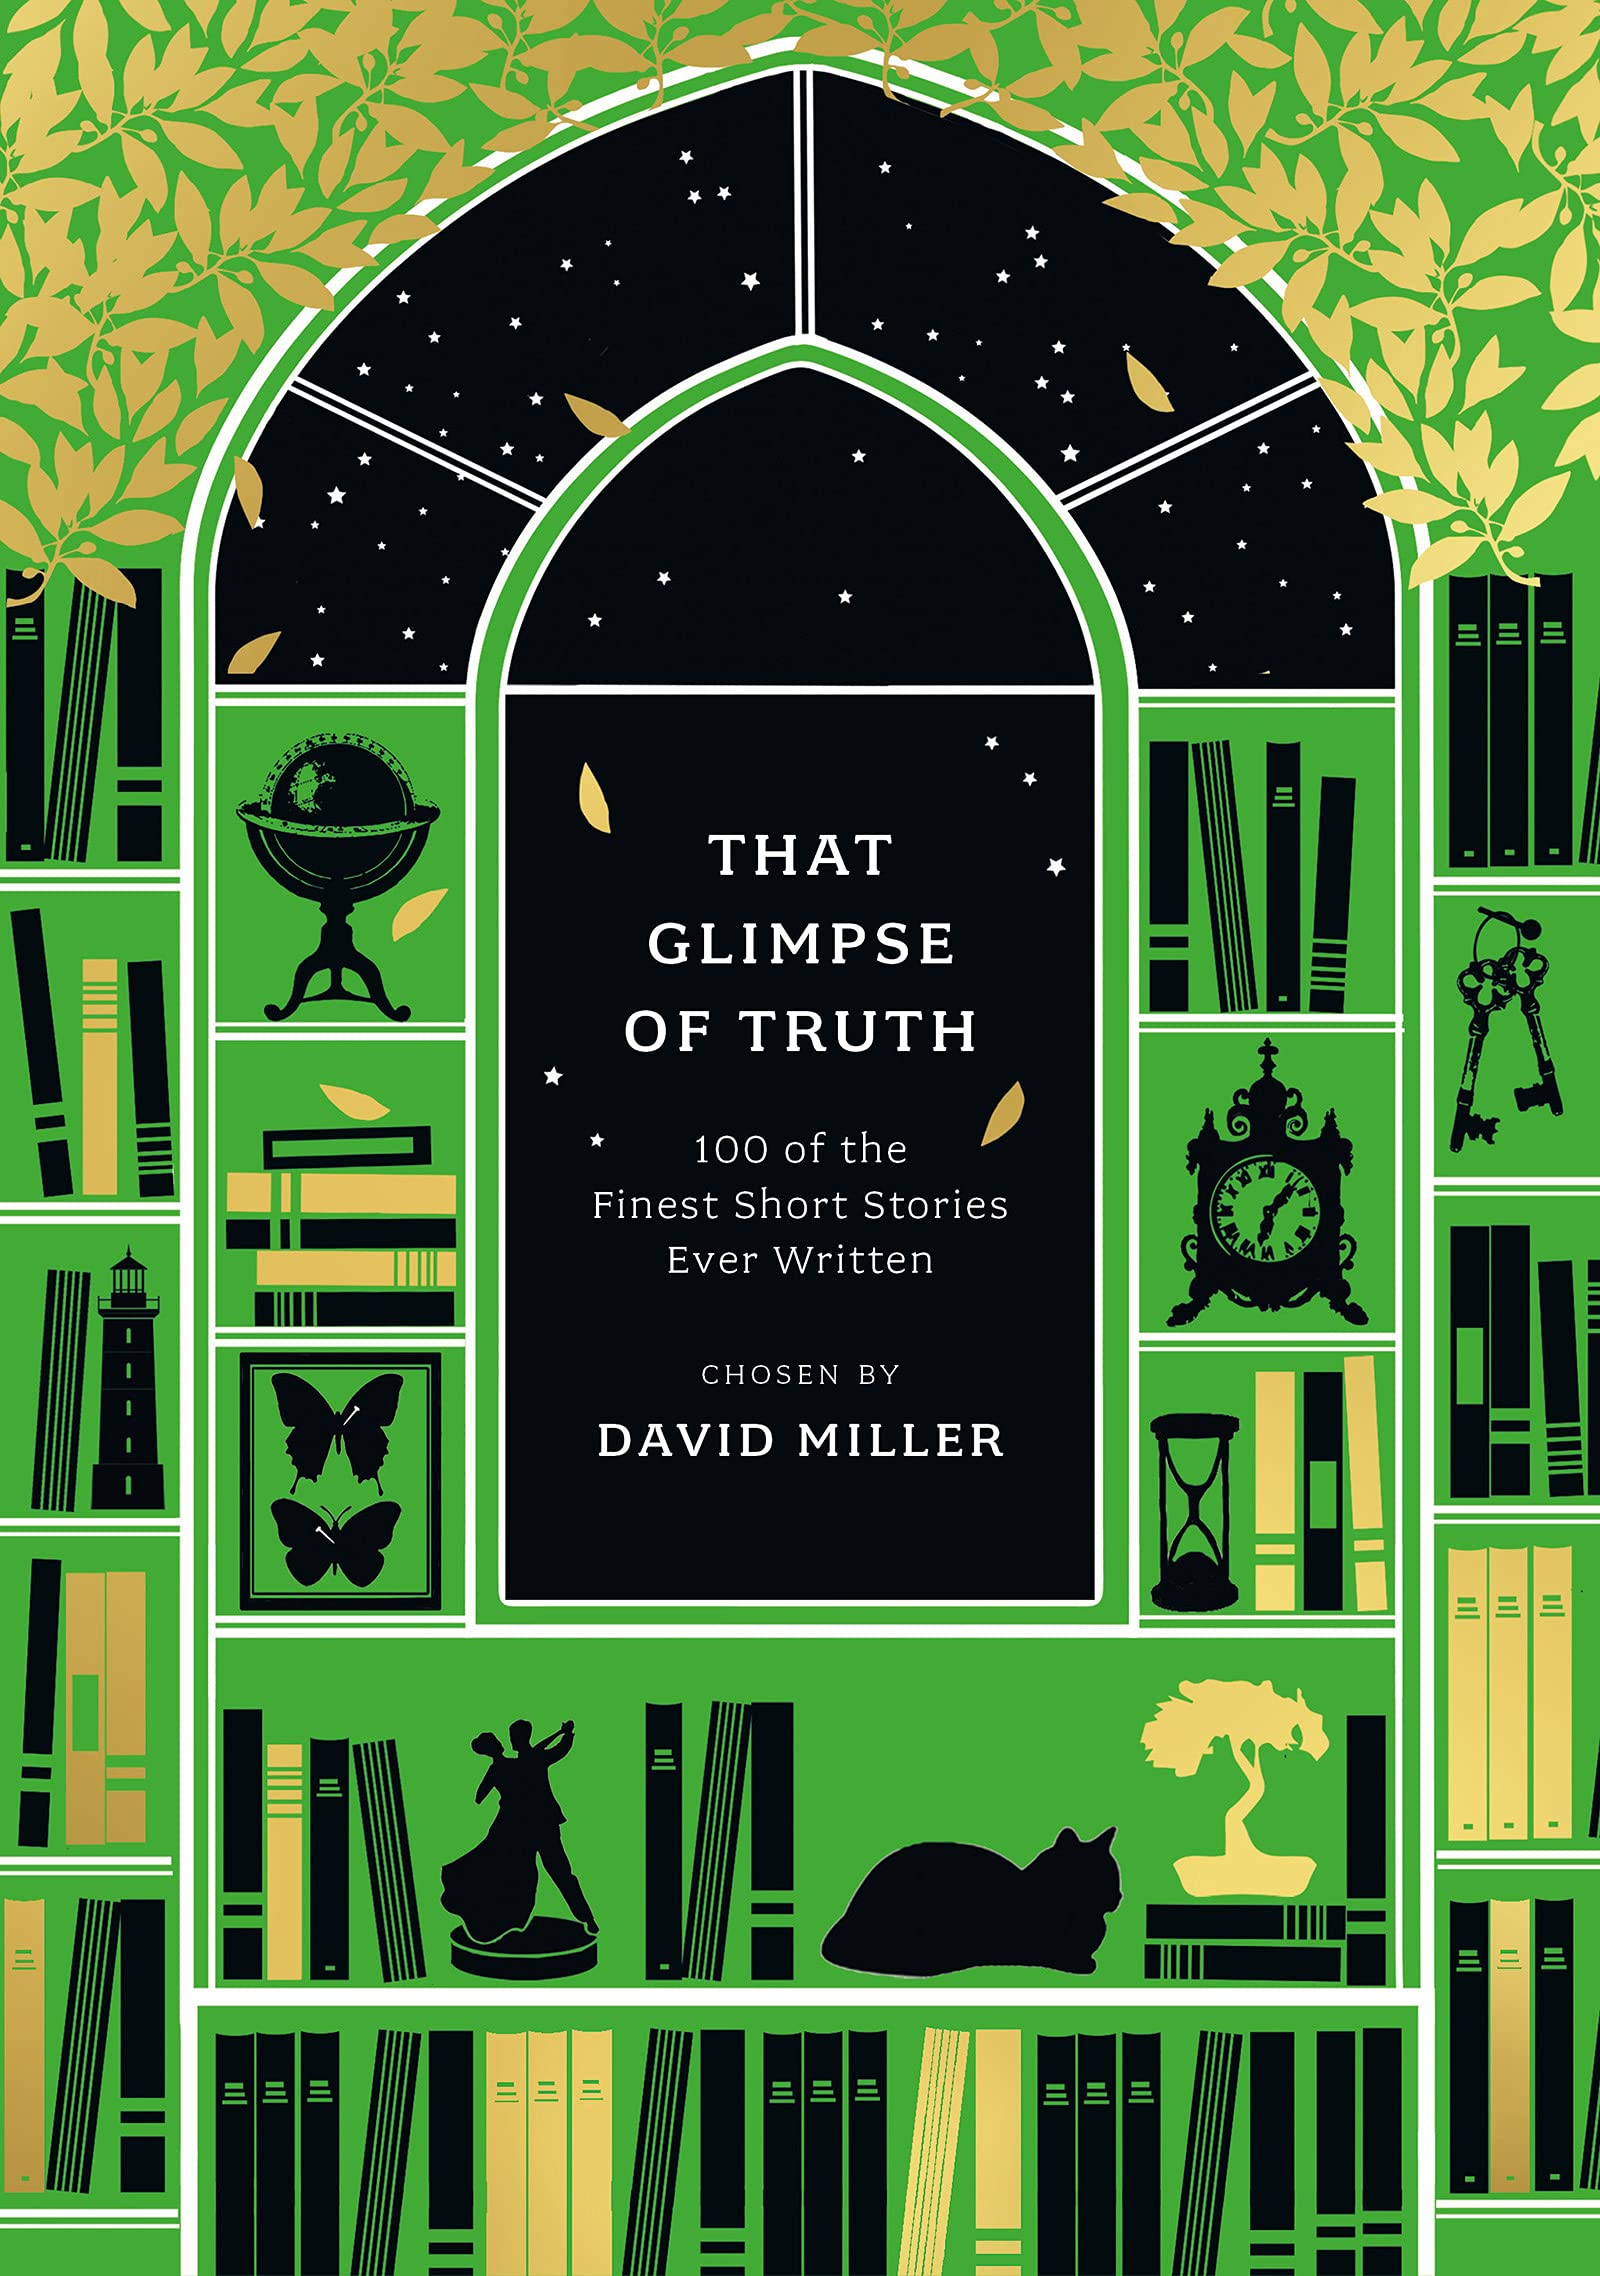 That Glimpse of Truth | David Miller image3